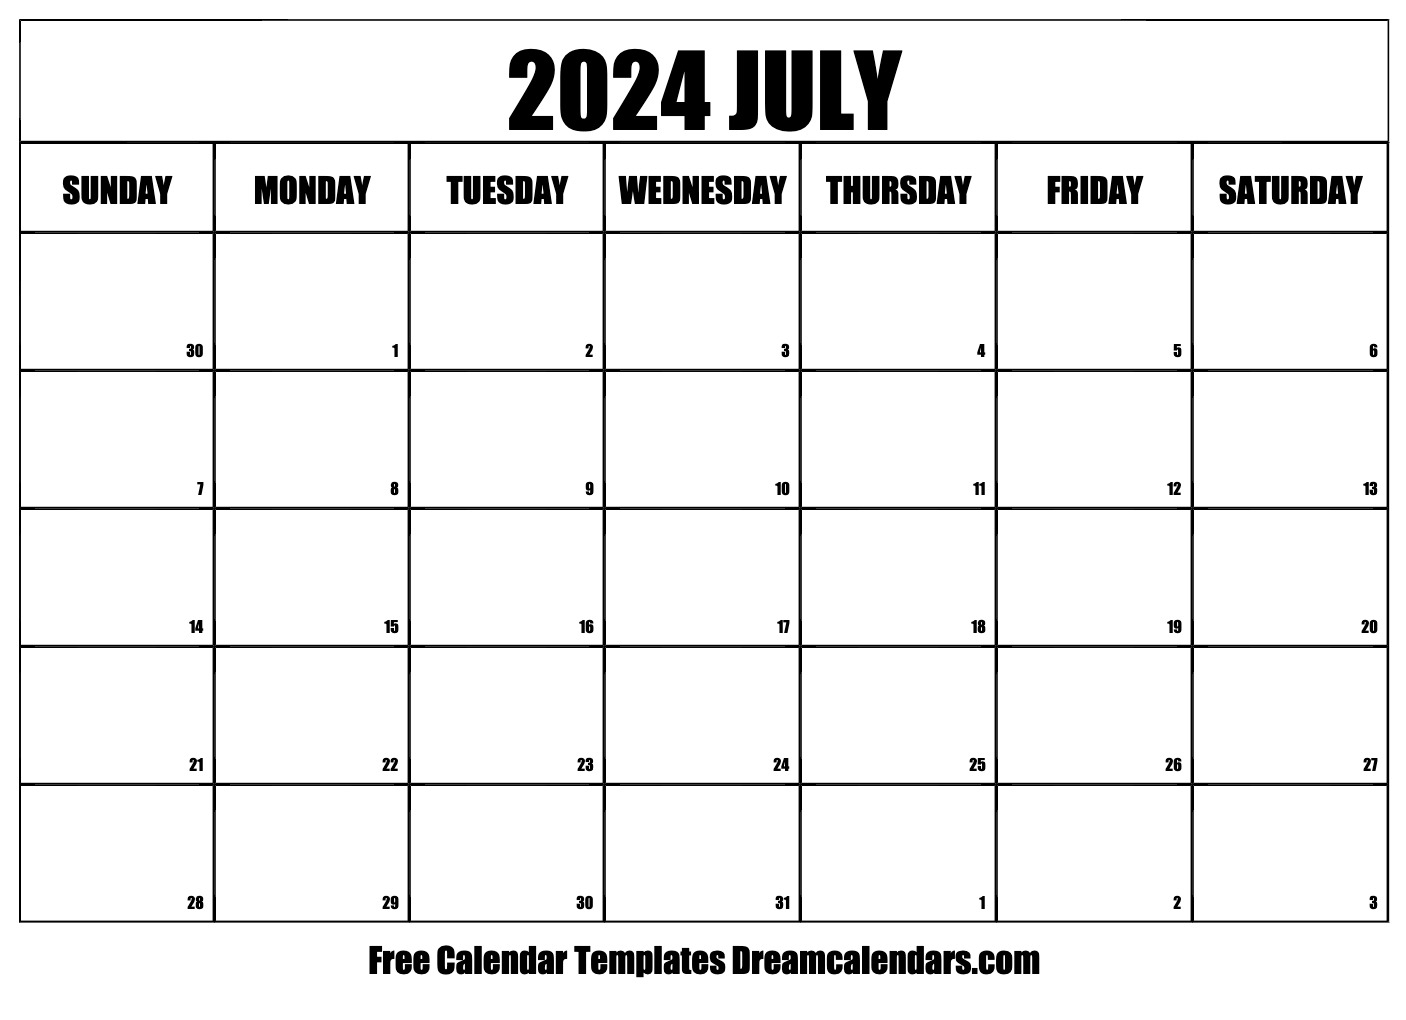 July 2024 Calendar | Free Blank Printable With Holidays for Free Printable July Calendar 2024